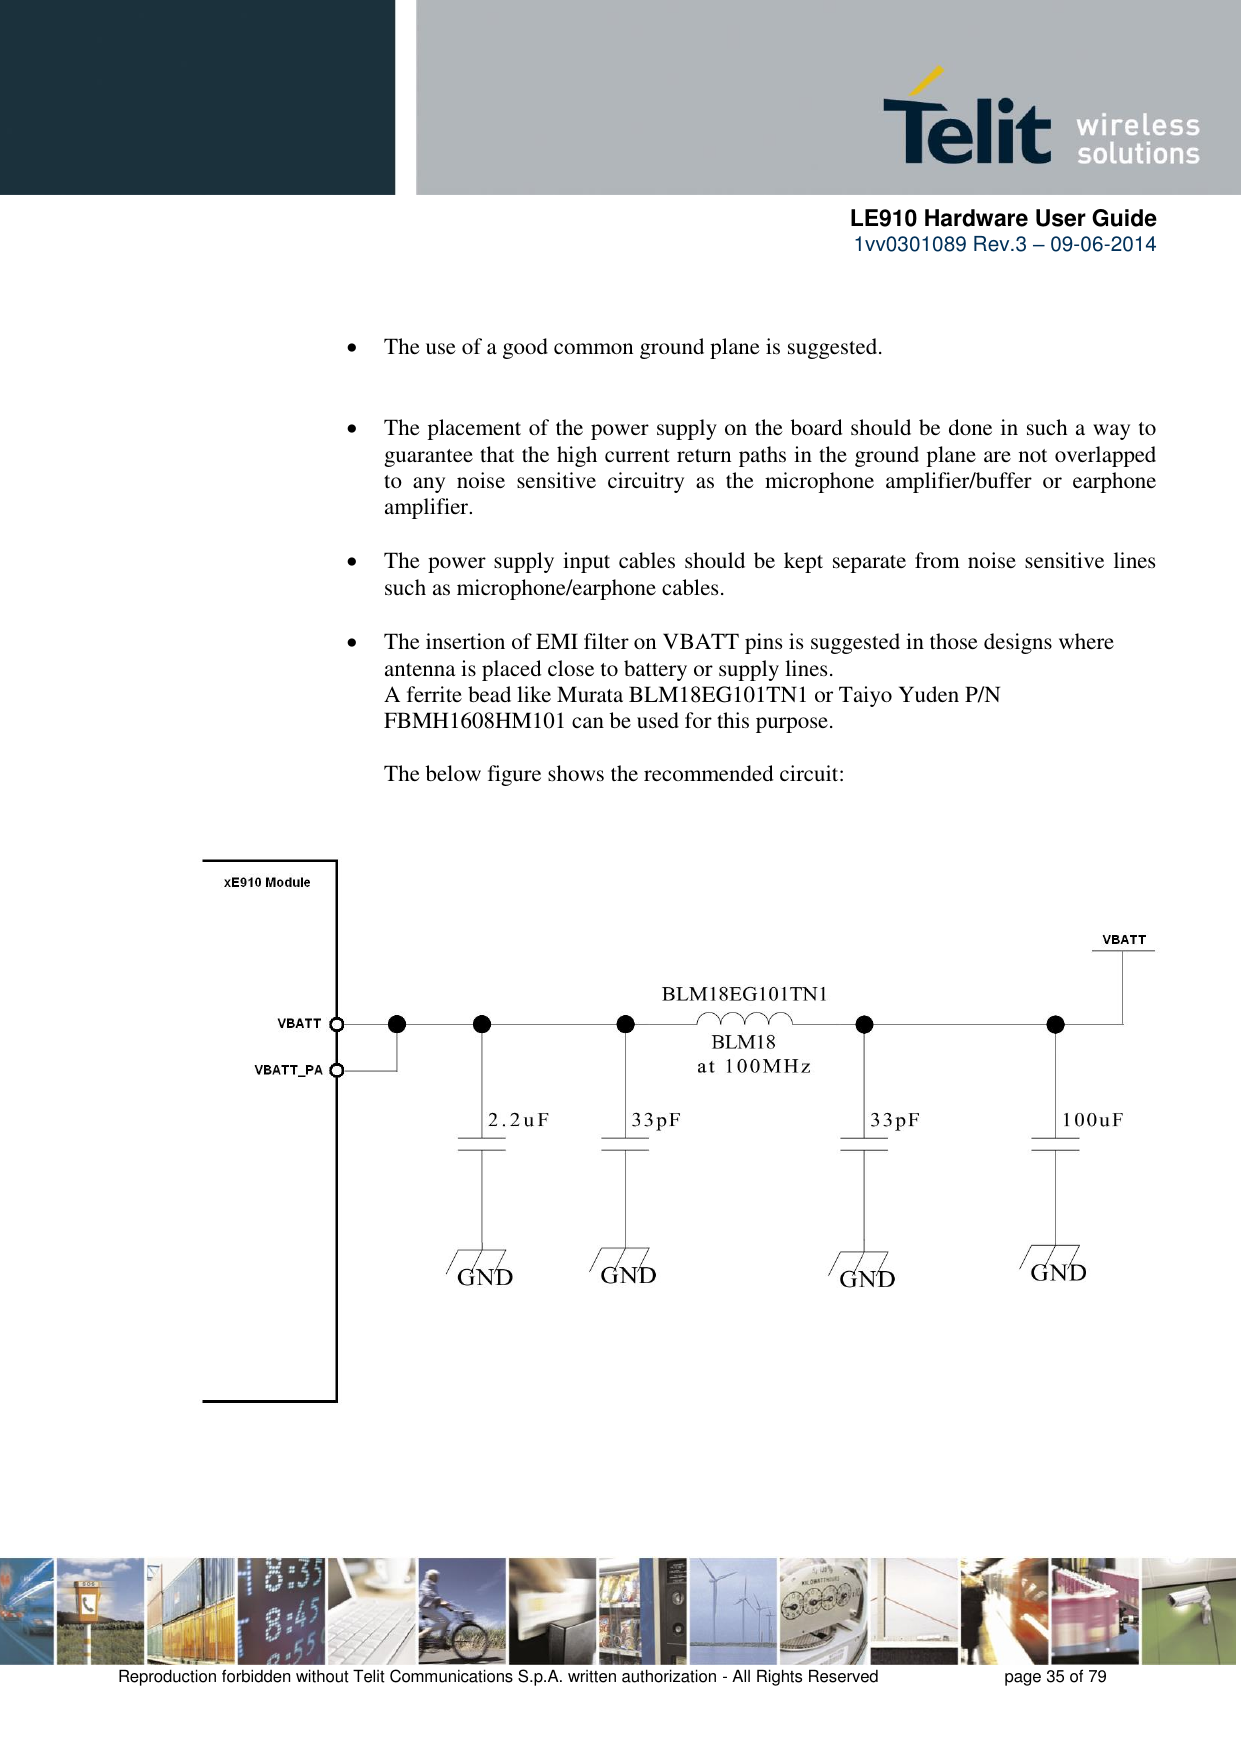      LE910 Hardware User Guide 1vv0301089 Rev.3 – 09-06-2014    Reproduction forbidden without Telit Communications S.p.A. written authorization - All Rights Reserved    page 35 of 79     The use of a good common ground plane is suggested.    The placement of the power supply on the board should be done in such a way to guarantee that the high current return paths in the ground plane are not overlapped to  any  noise  sensitive  circuitry  as  the  microphone  amplifier/buffer  or  earphone amplifier.   The power supply input cables should be kept separate from noise sensitive lines such as microphone/earphone cables.   The insertion of EMI filter on VBATT pins is suggested in those designs where antenna is placed close to battery or supply lines. A ferrite bead like Murata BLM18EG101TN1 or Taiyo Yuden P/N FBMH1608HM101 can be used for this purpose.  The below figure shows the recommended circuit:                             